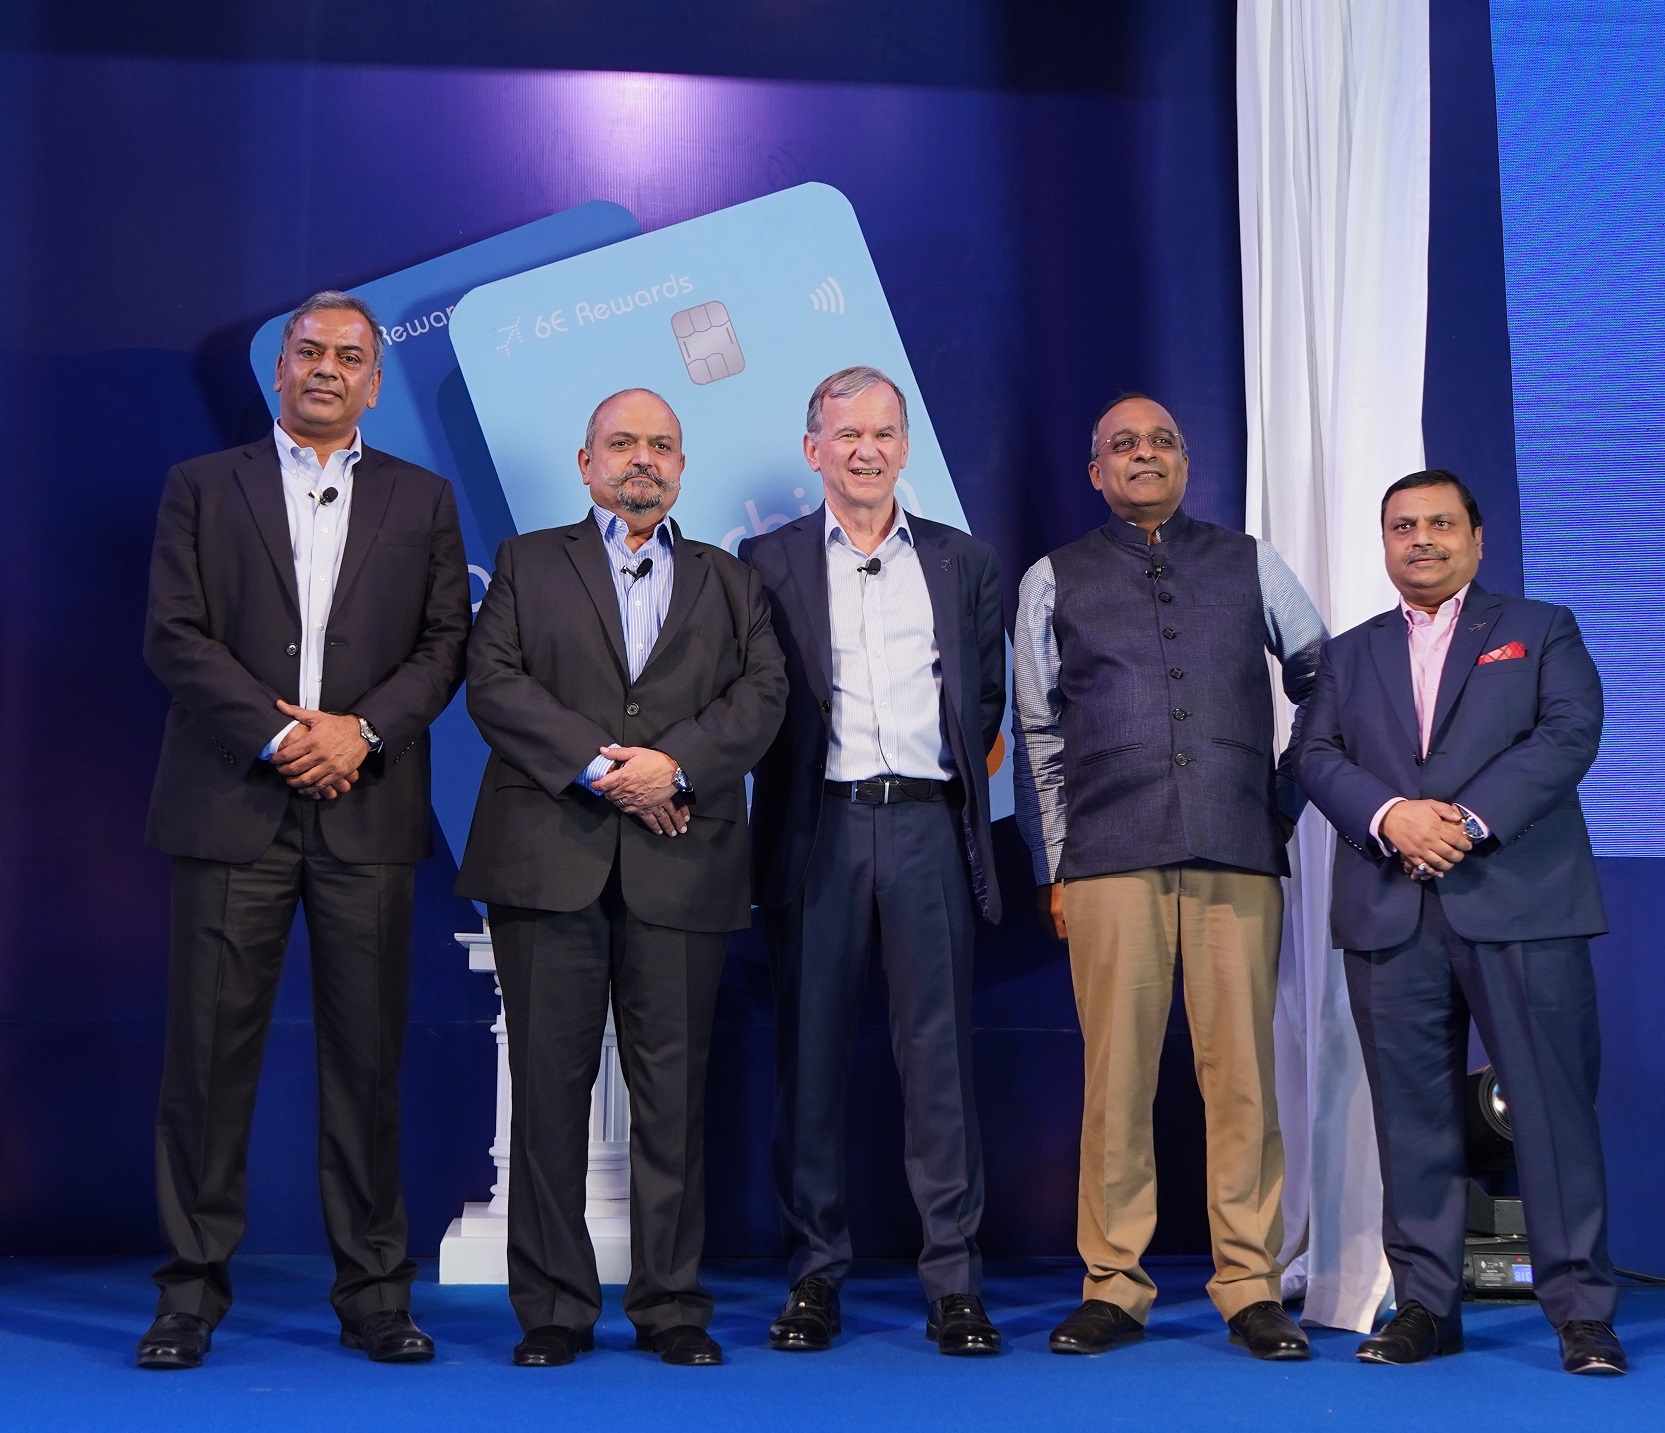 IndiGo partners with HDFC Bank to launch its first credit card ‘Ka-ching’